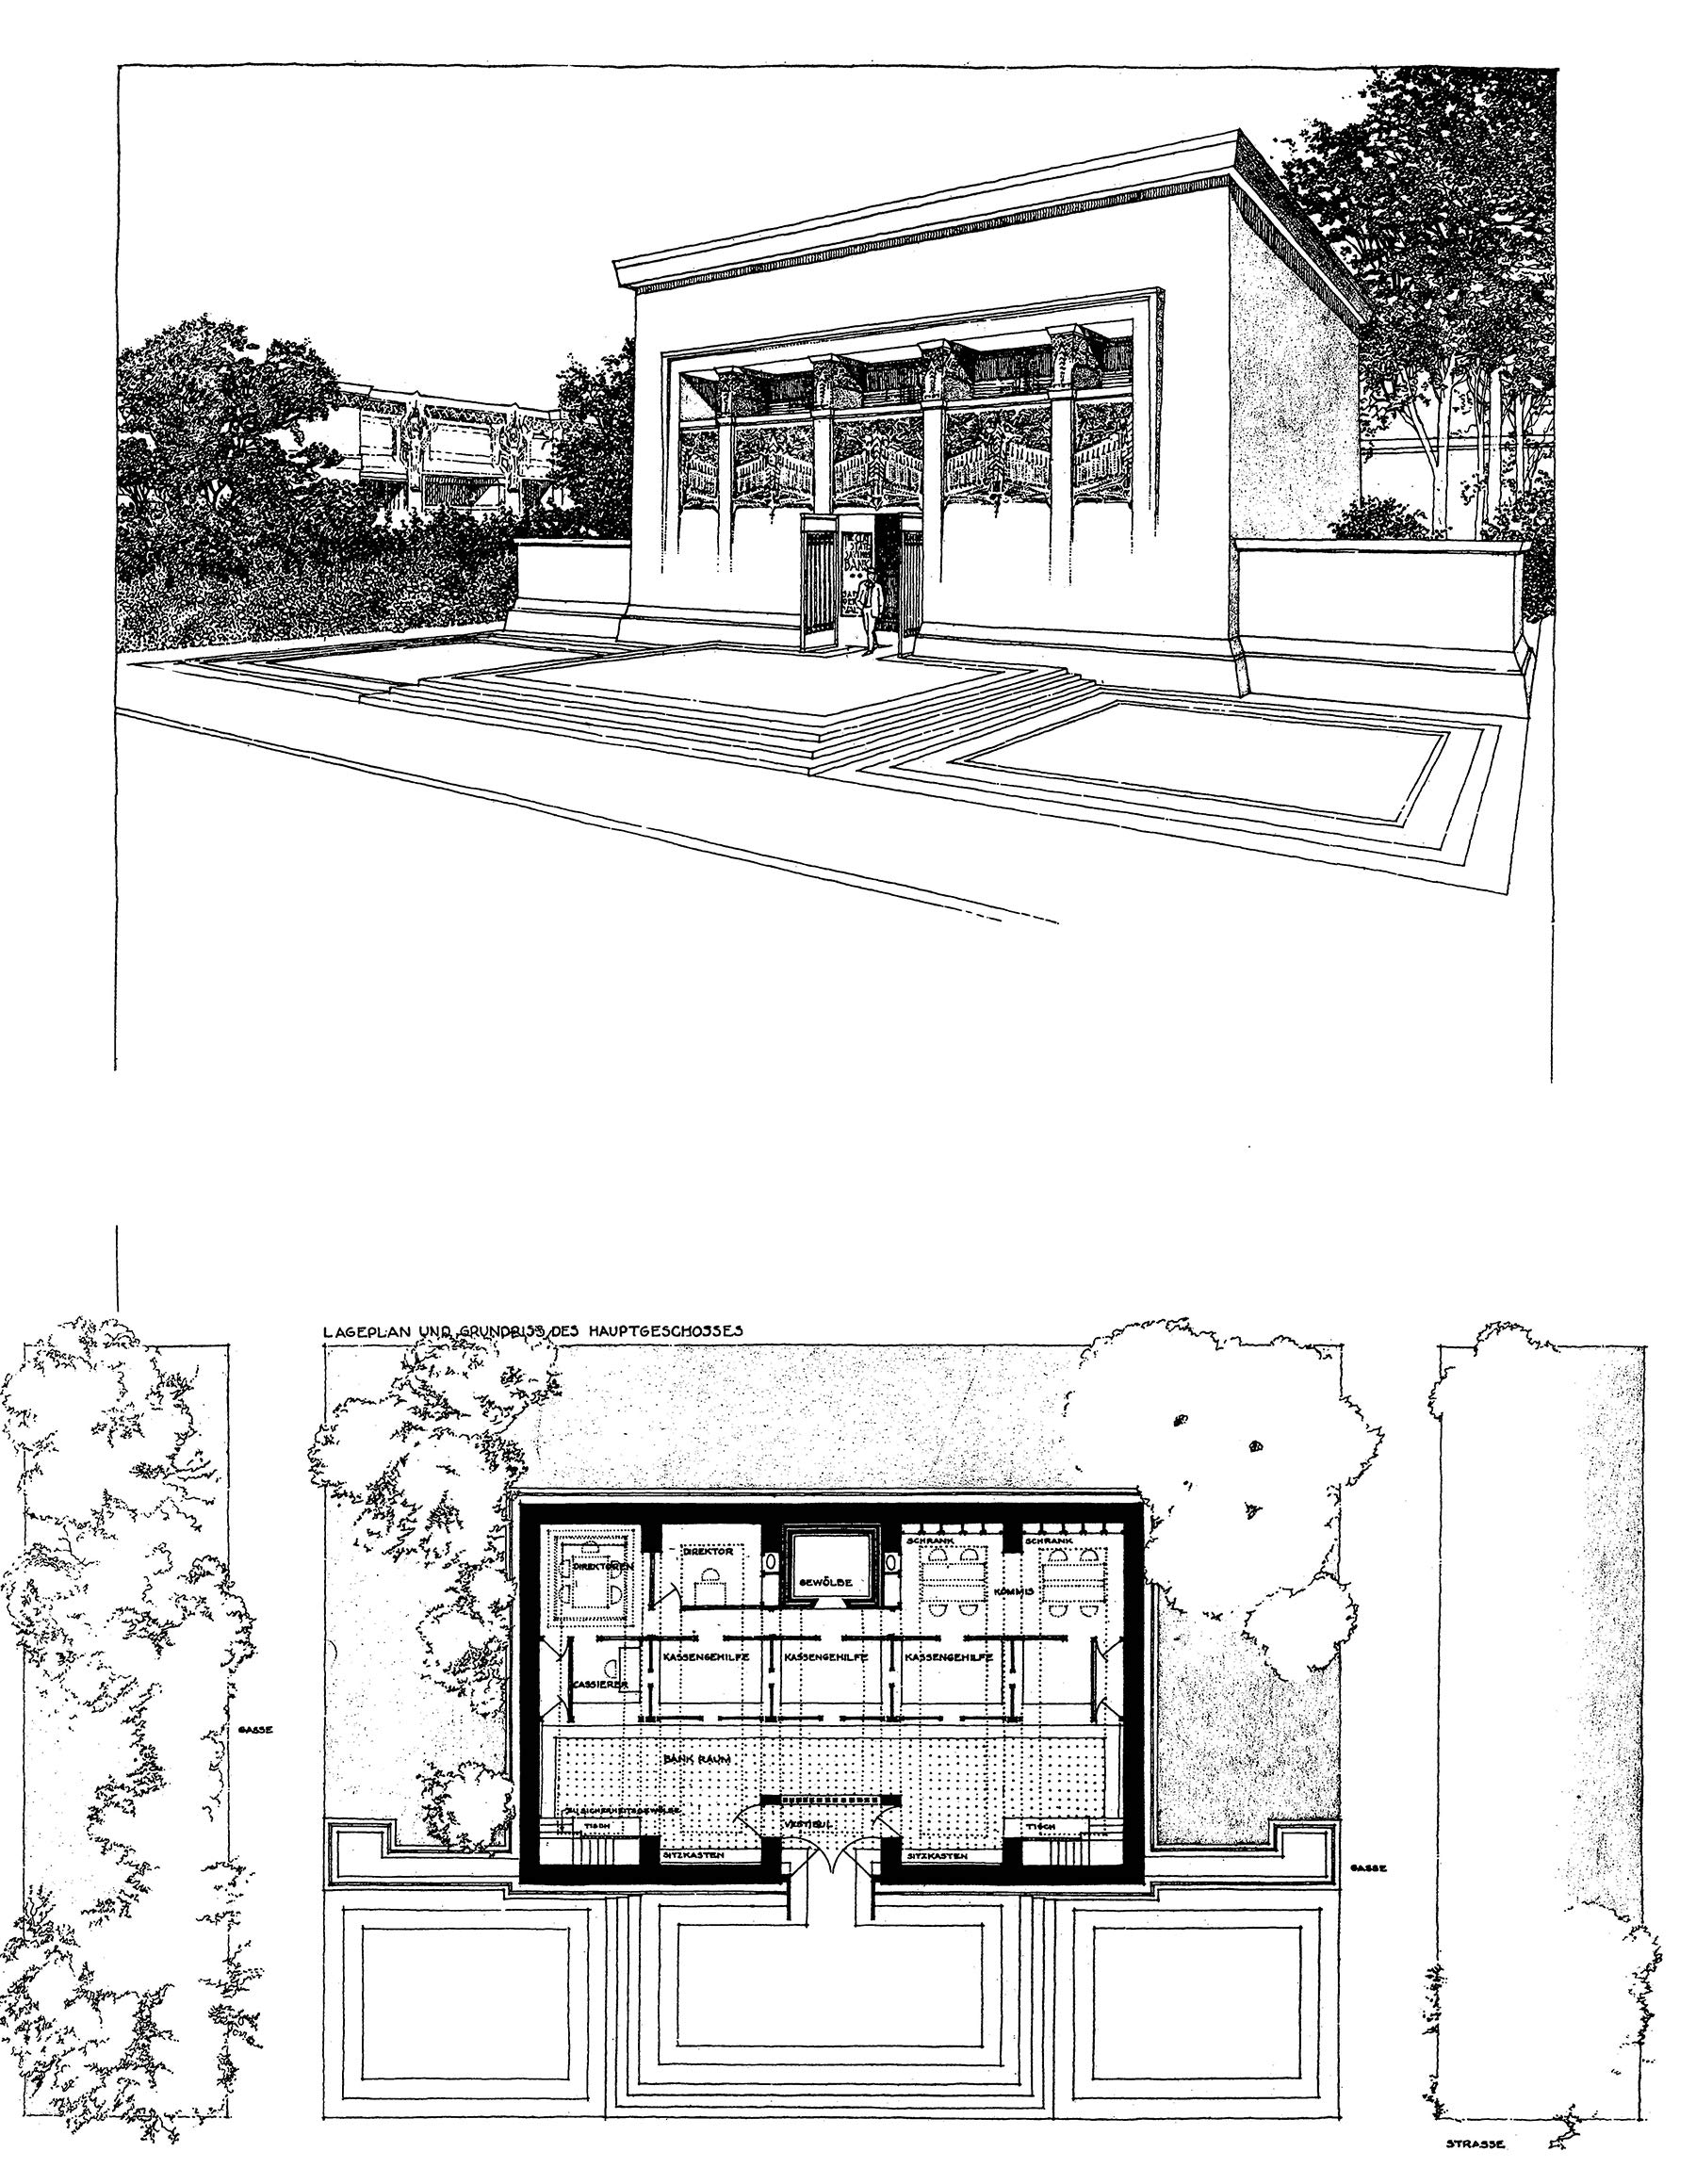 Drawings and Plans of Frank Lloyd Wright: The Early Period (1893-1909) (Dover Architecture)